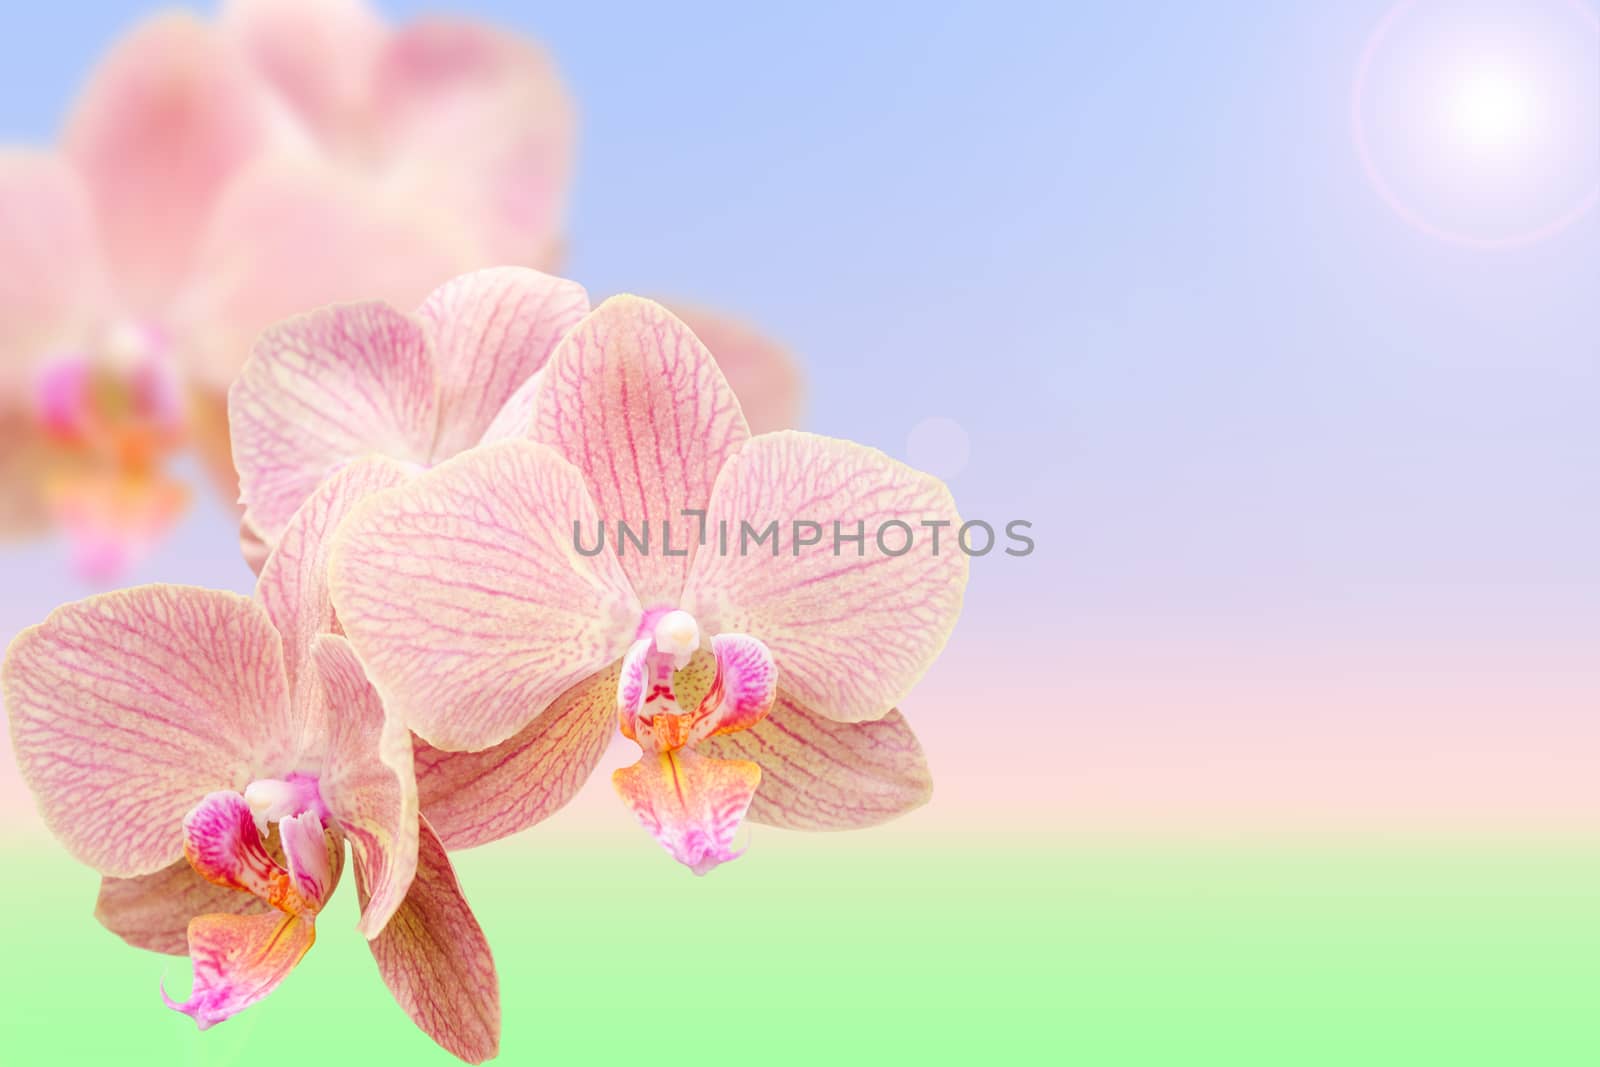 Spring flowering exotic pink orchids on morning blurred background with free copy-space place for your text